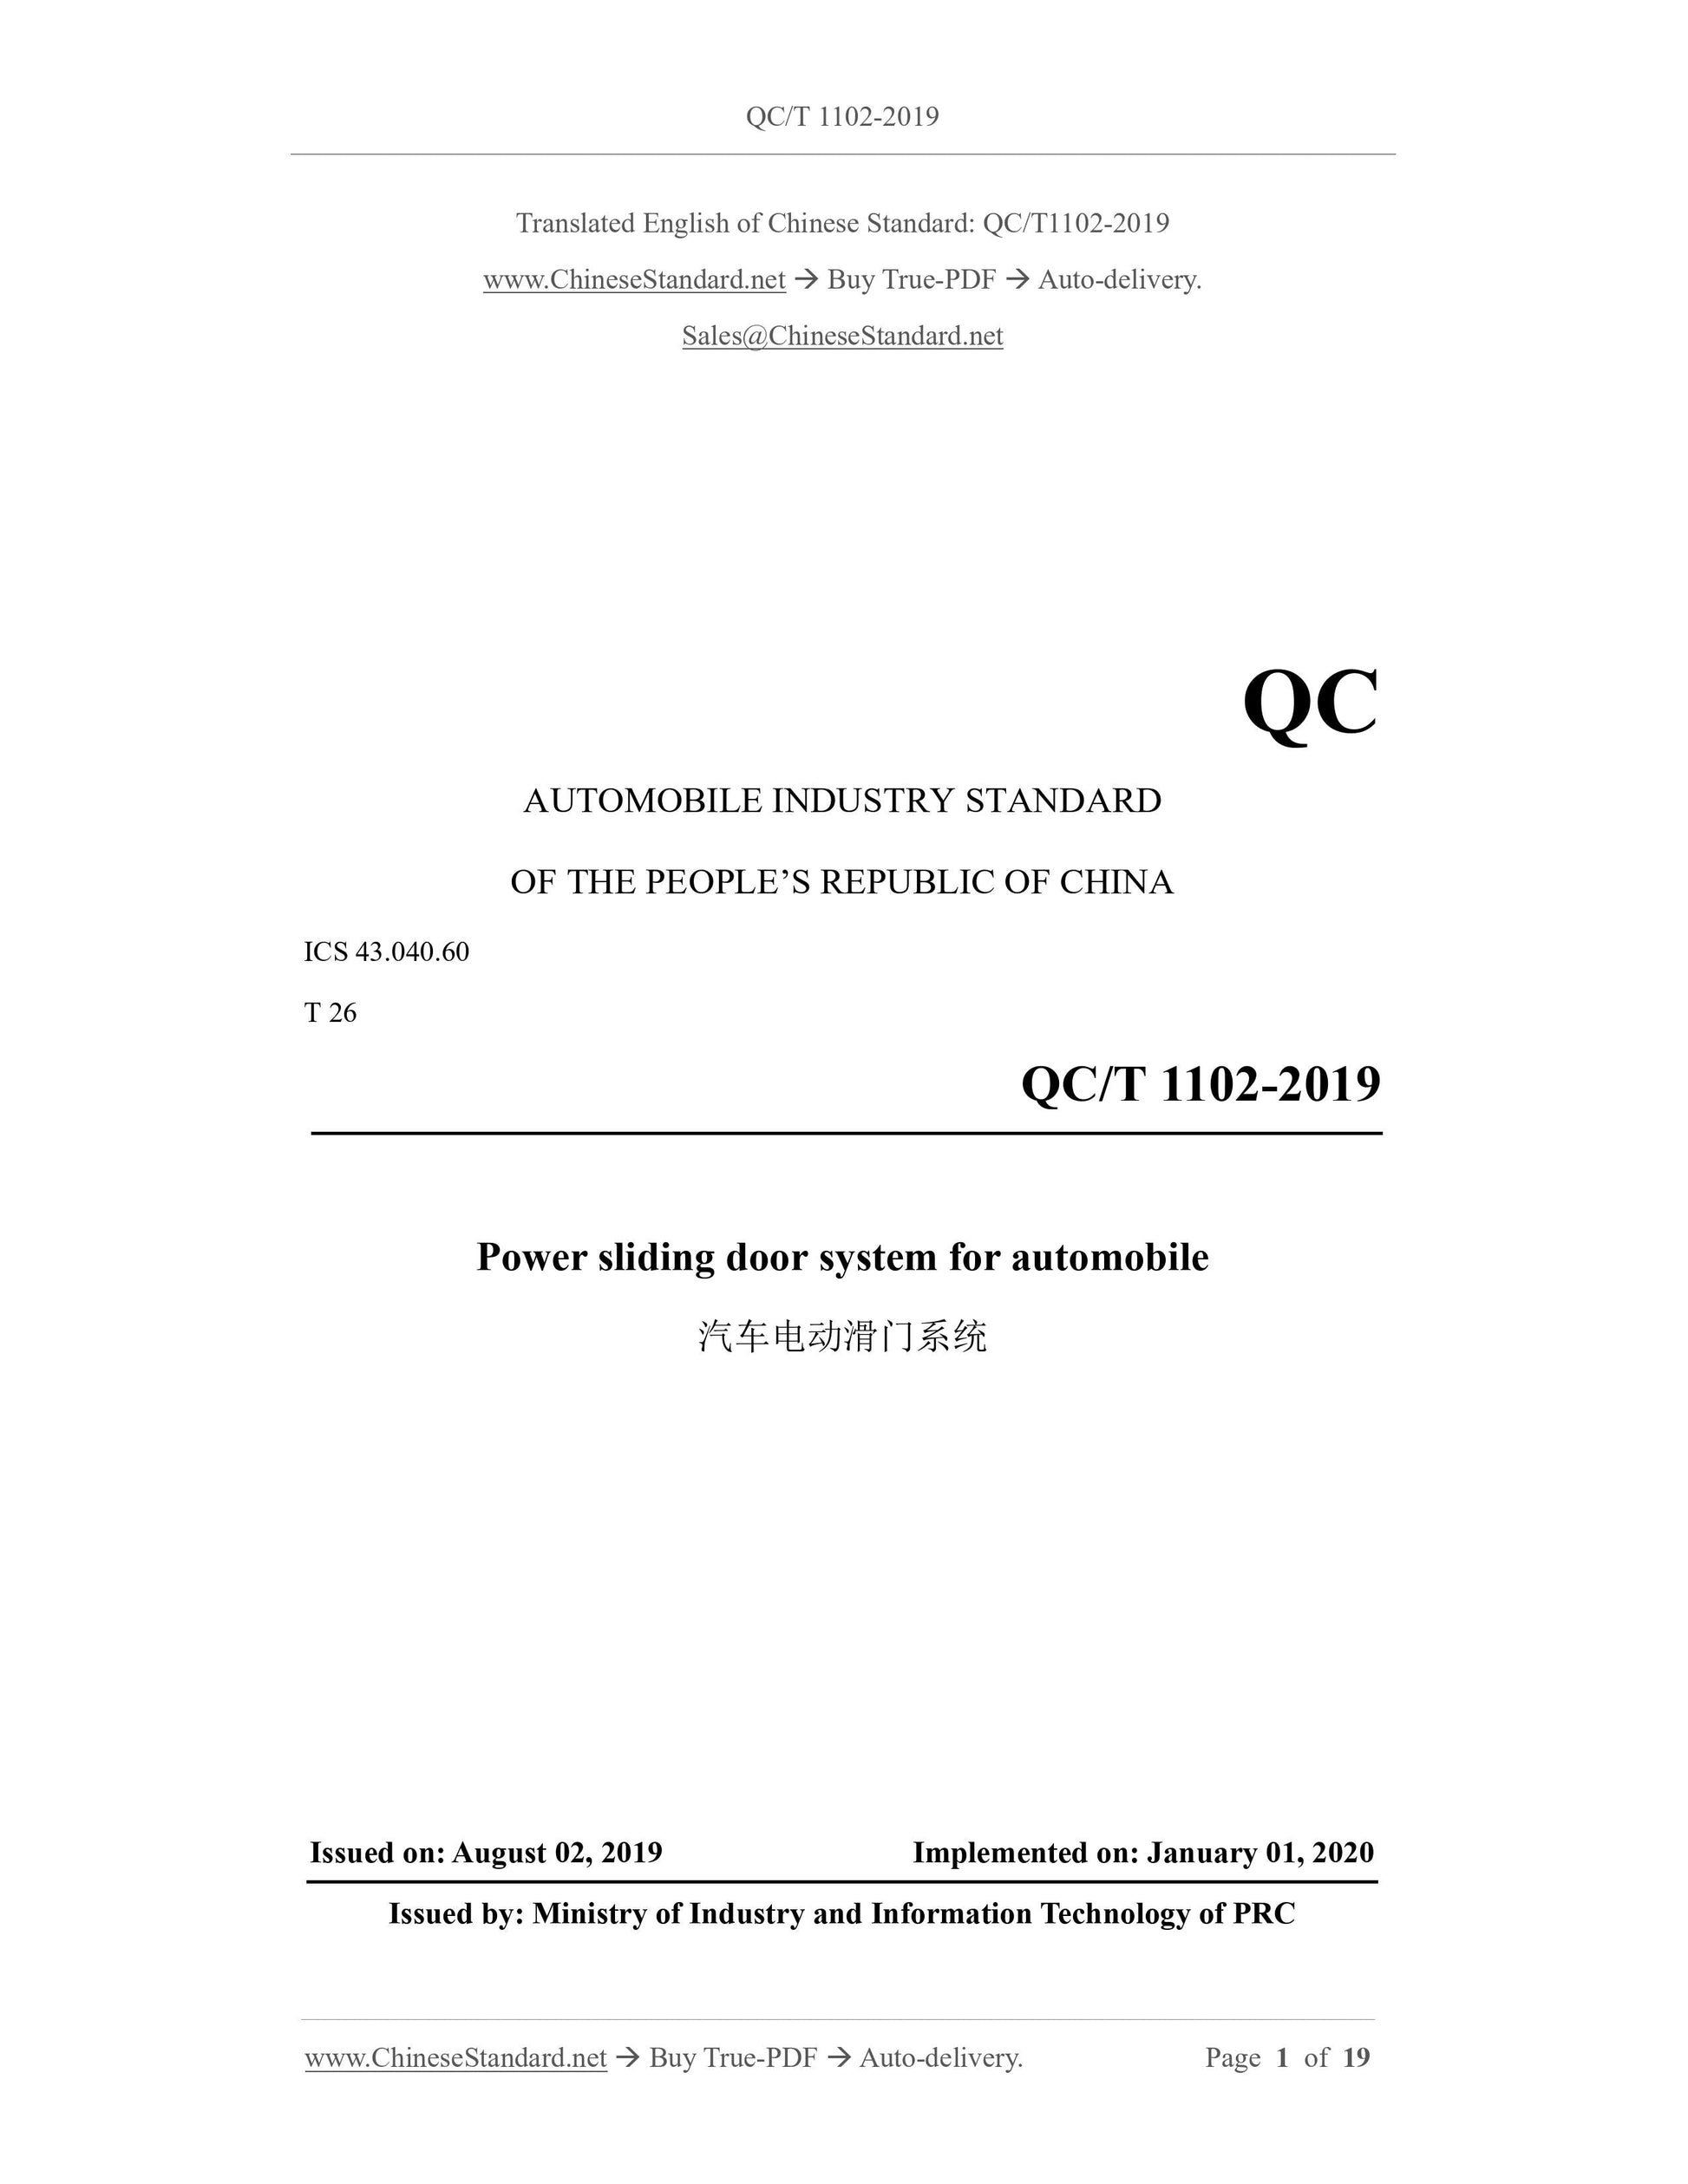 QC/T 1102-2019 Page 1